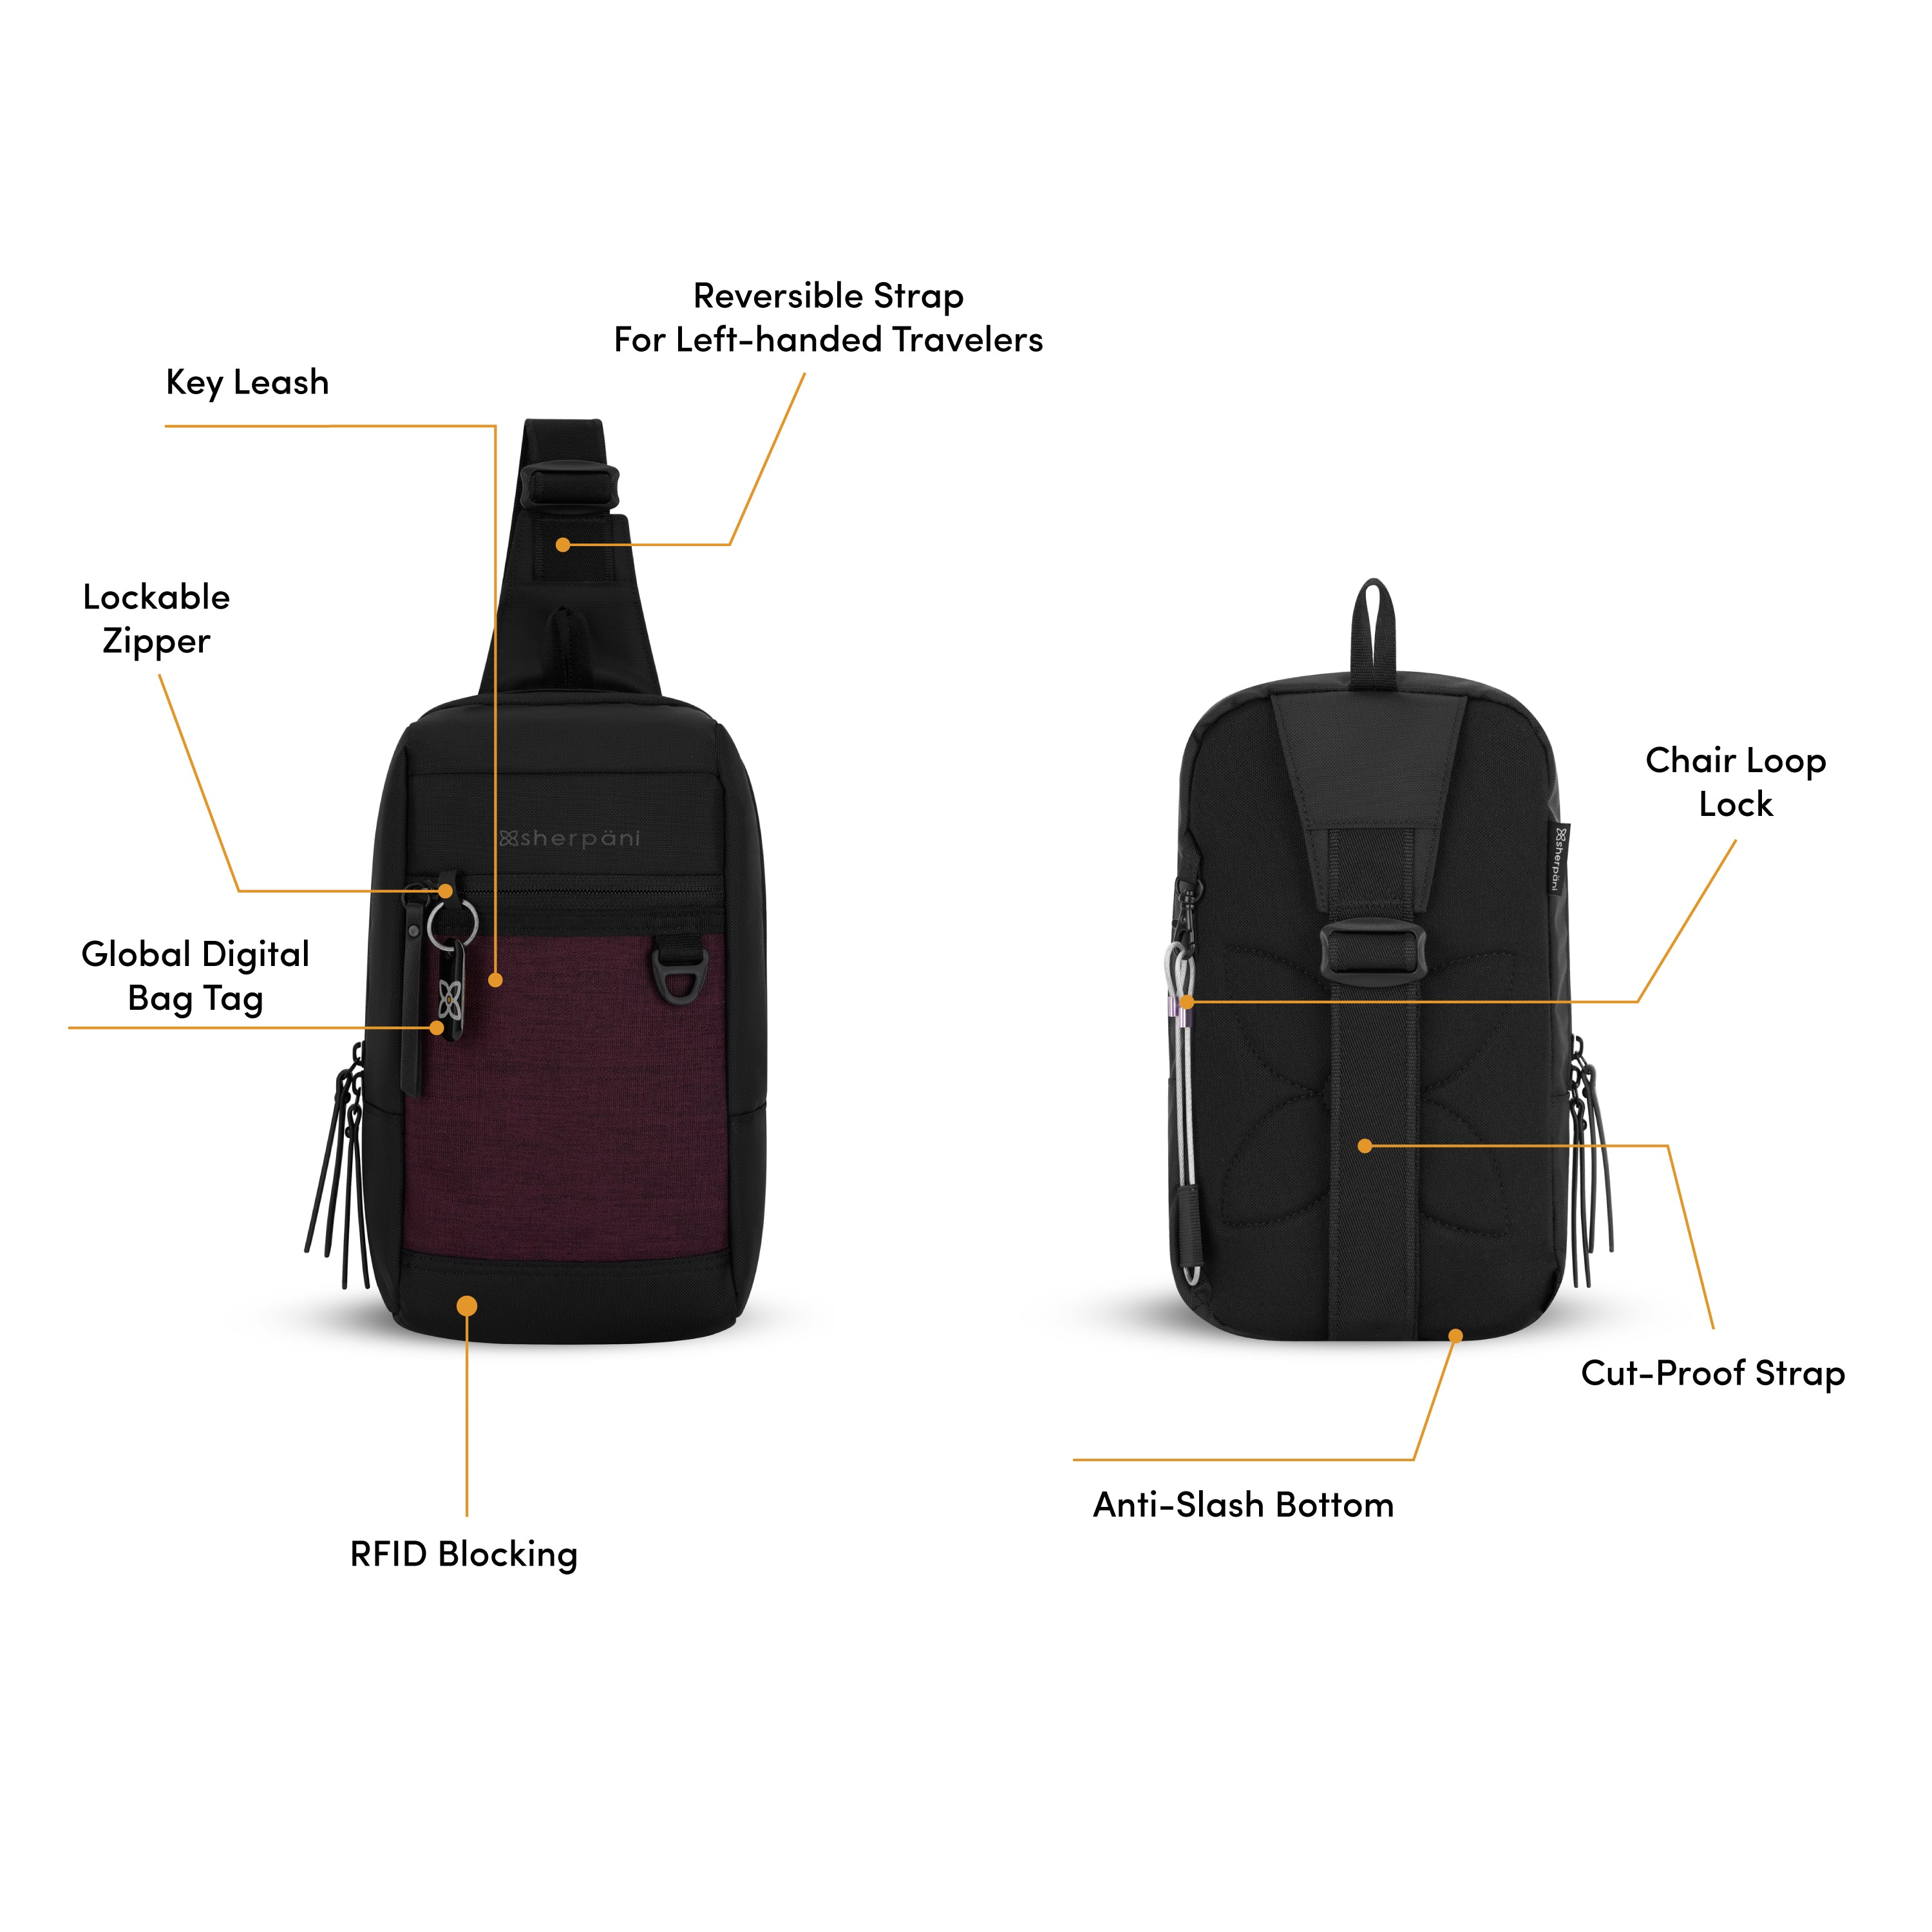 Graphic showing front and back view of the Sherpani Metro travel sling bag. Yellow circles highlight the following features: Reversible Strap For Left-Handed Travelers, Key Leash, Lockable Zipper, Global Digital Bag Tag, RFID Blocking, Chair Loop Lock, Cut-Proof Strap, Anti-Slash Bottom. 